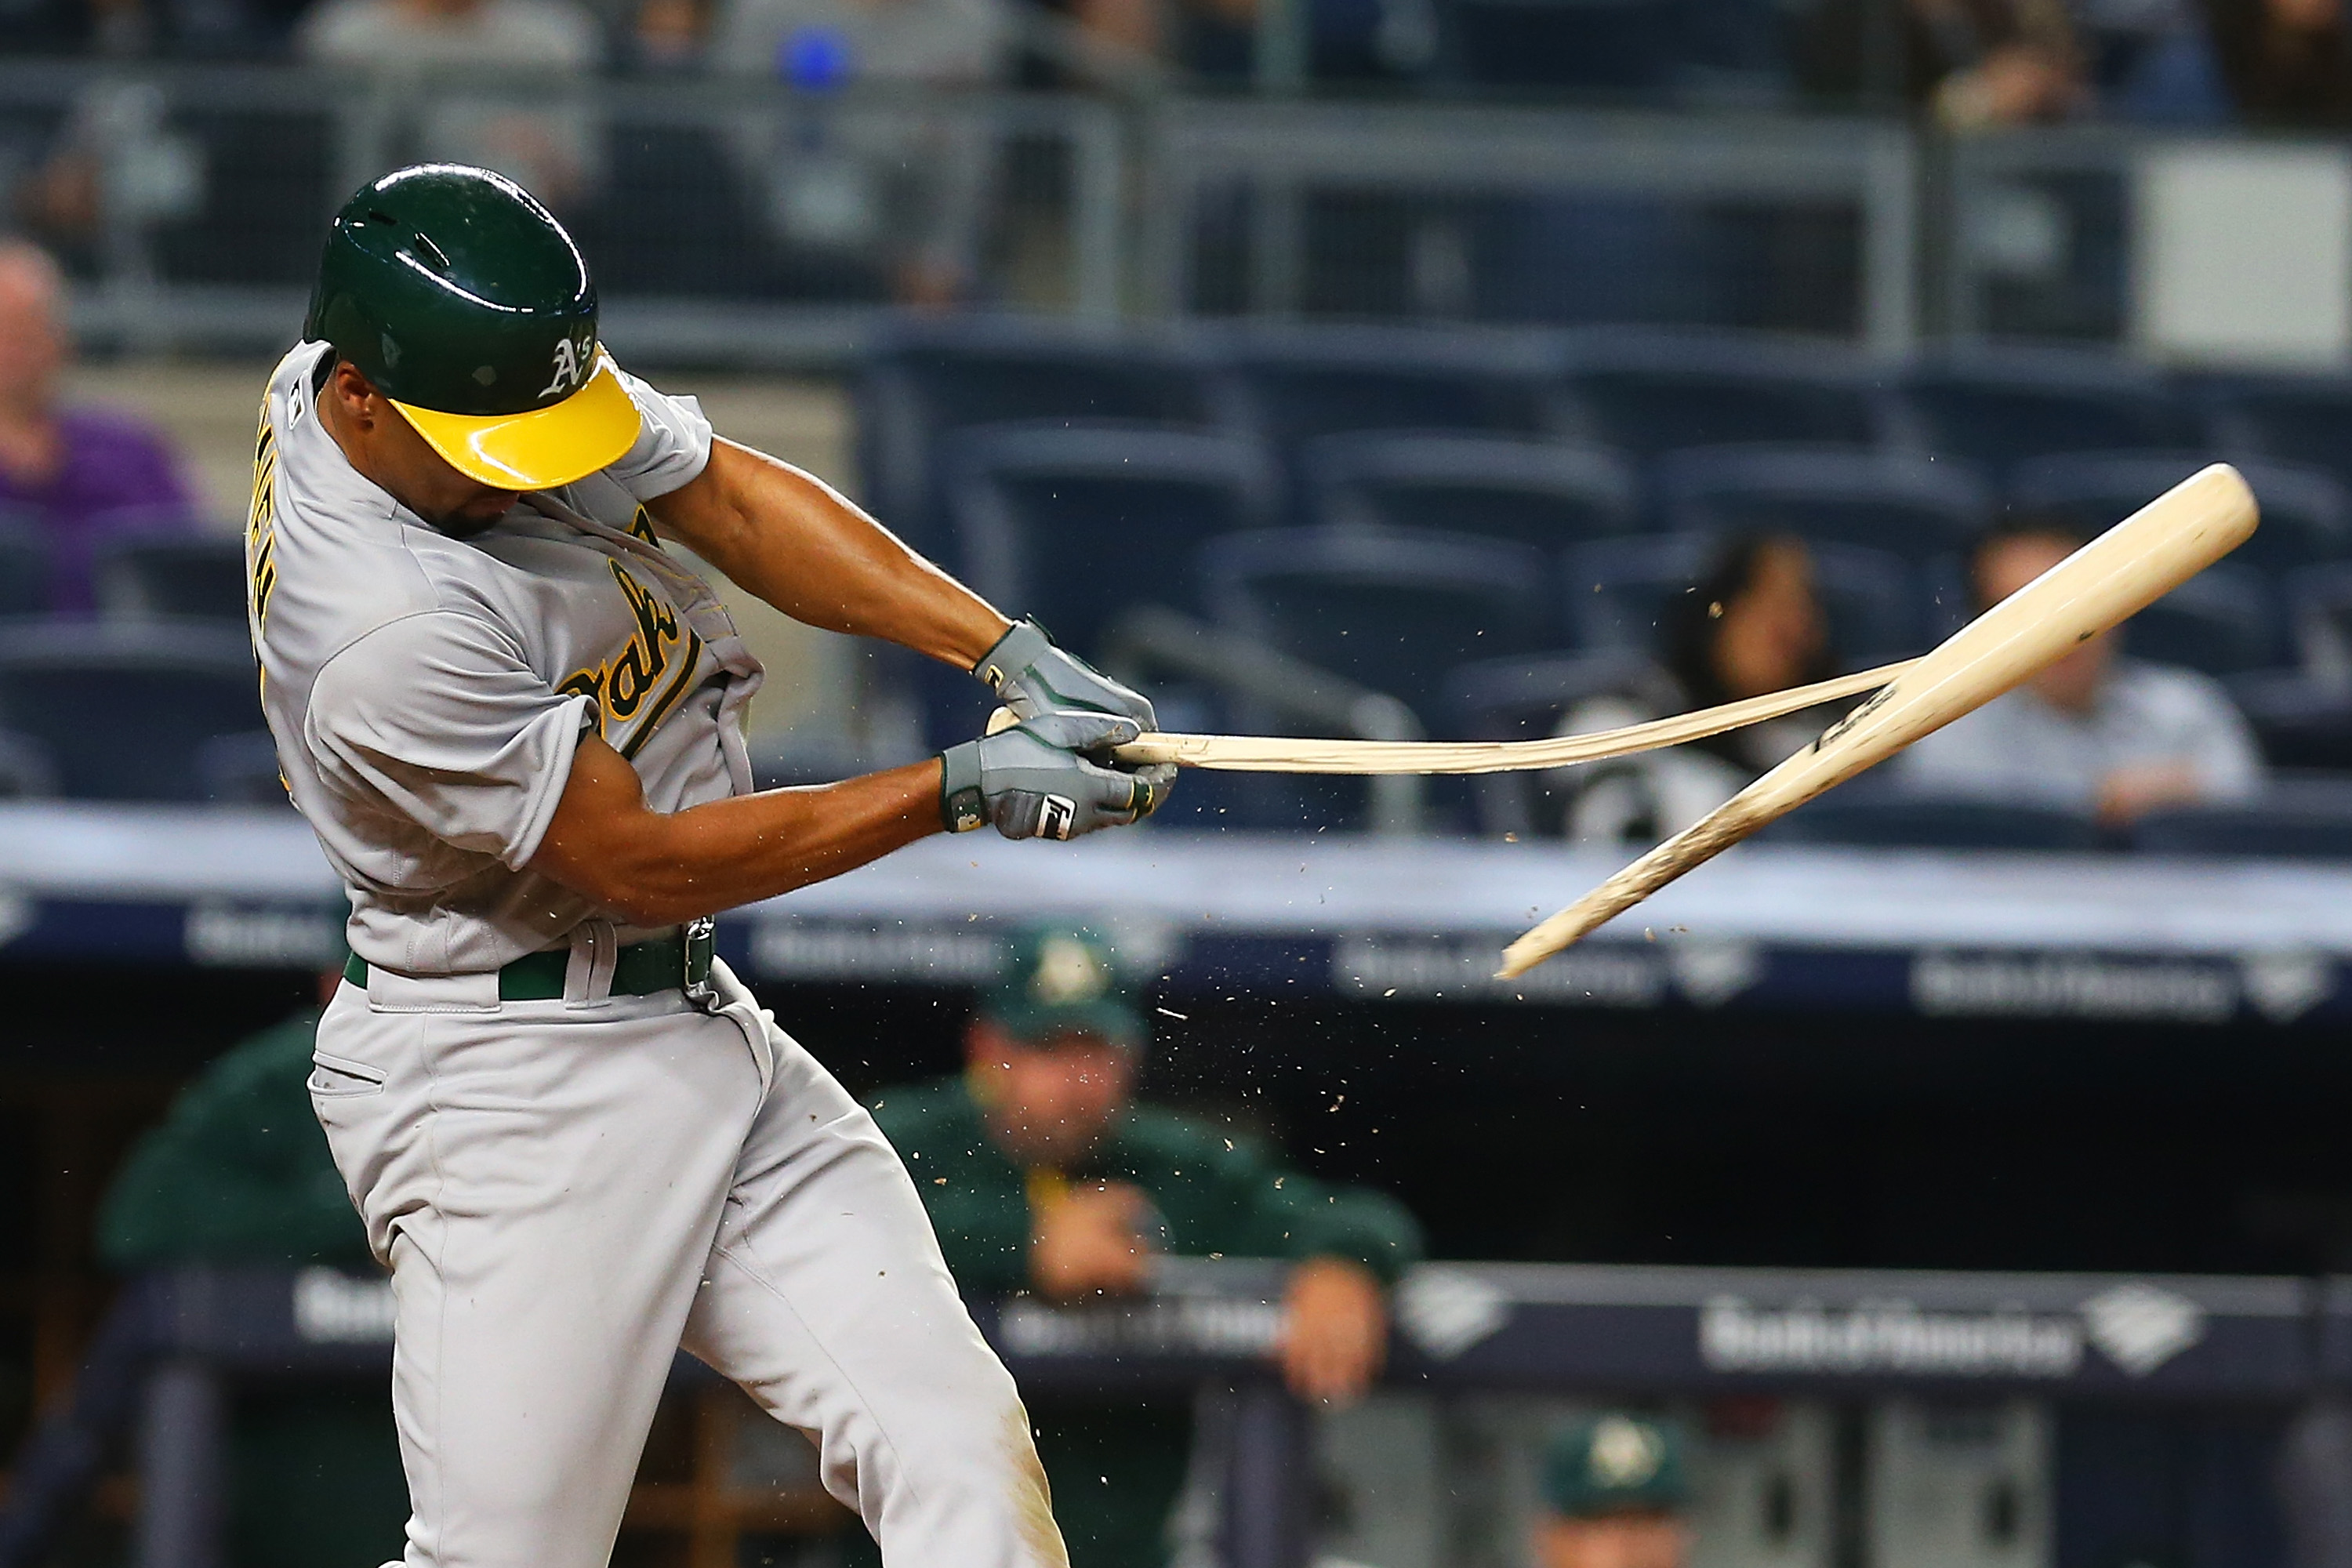 NEW YORK, NY - APRIL 21: Marcus Semien #10 of the Oakland Athletics breaks his bat during his at bat in the ninth inning against the New York Yankees at Yankee Stadium on April 21, 2016 in the Bronx borough of New York City.  